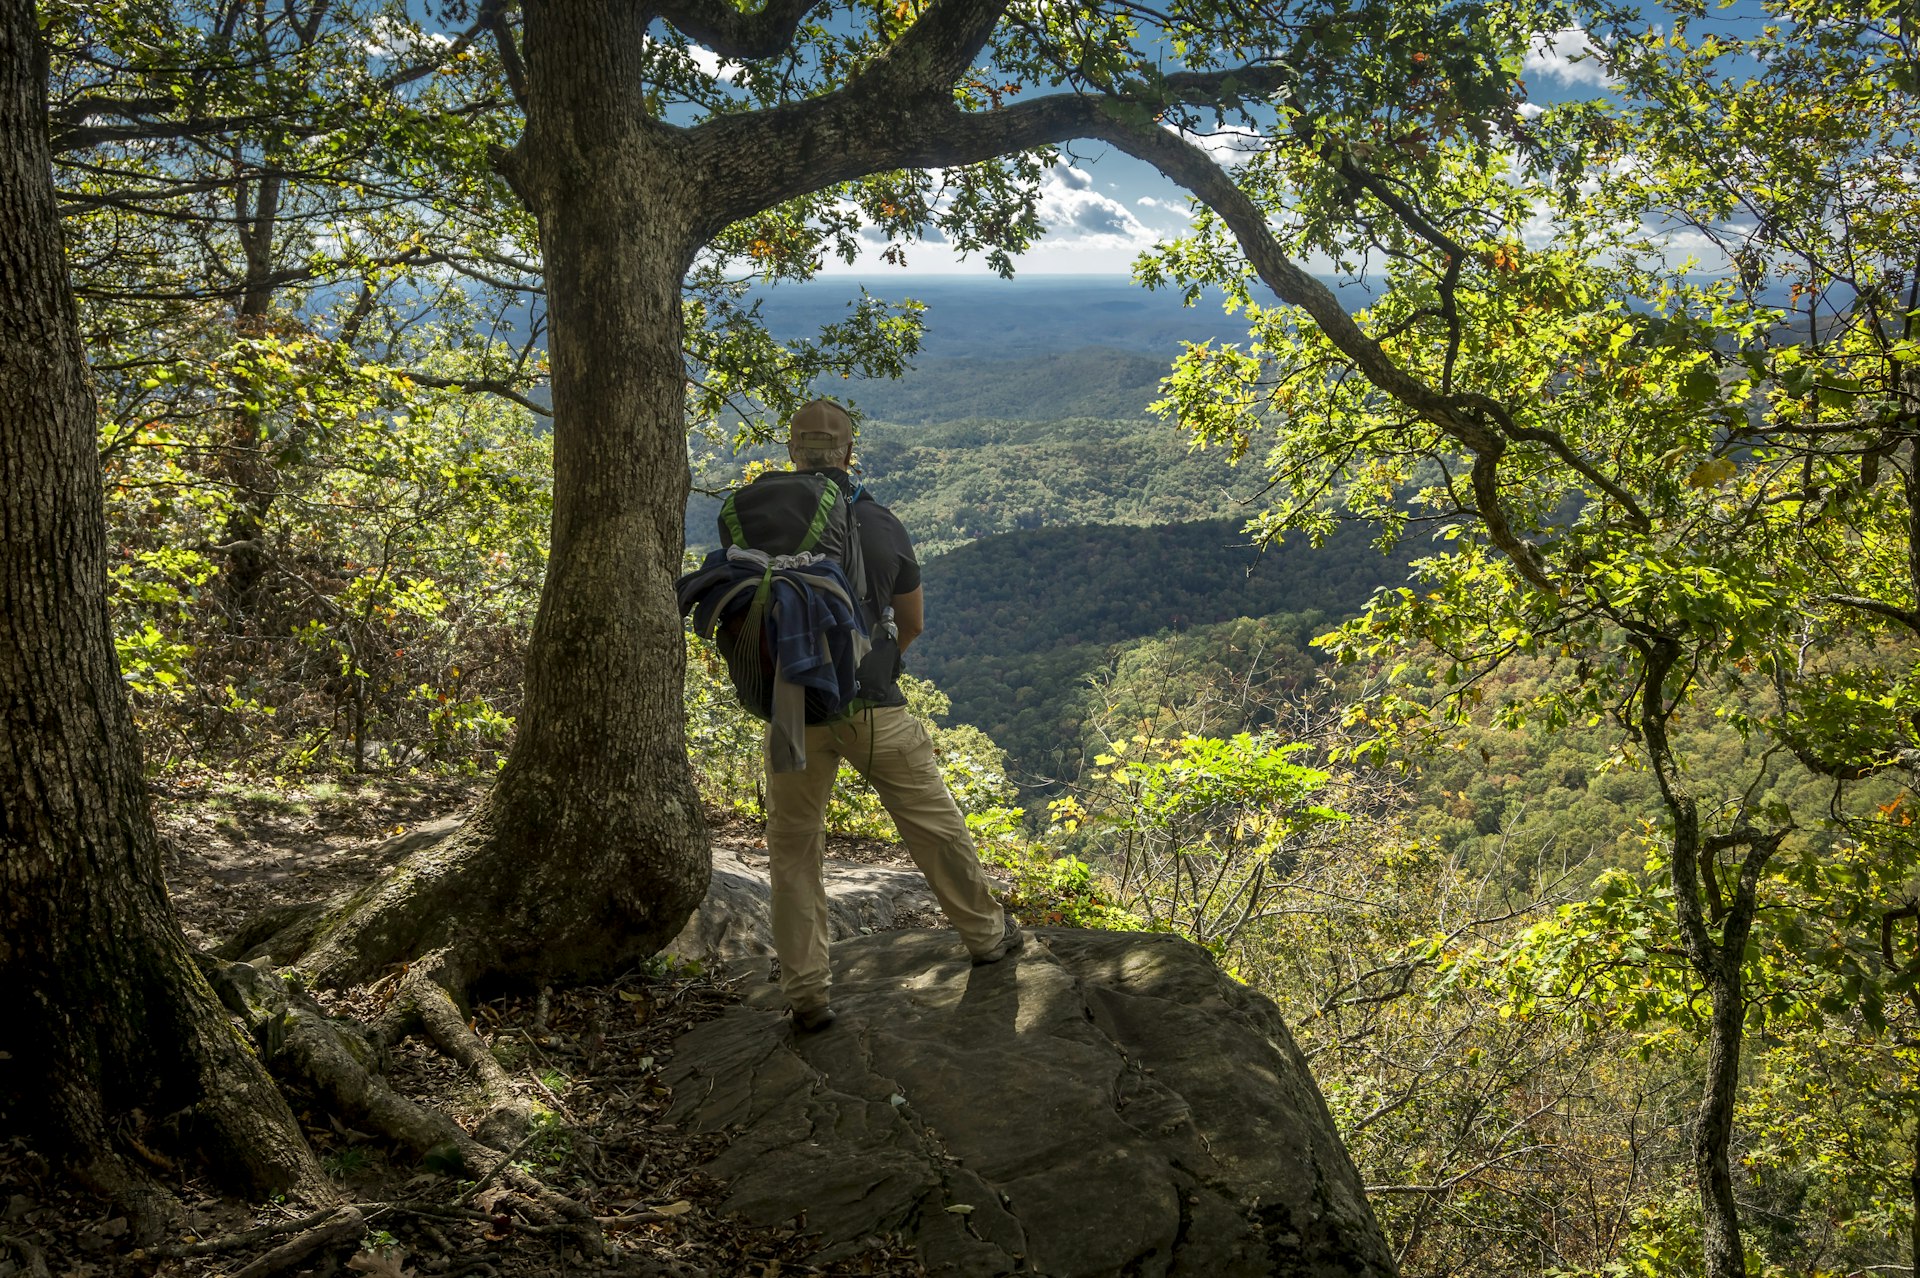 A hiker pauses at a lookout point over a tree-covered valley on the Appalachian Trail in Georgia